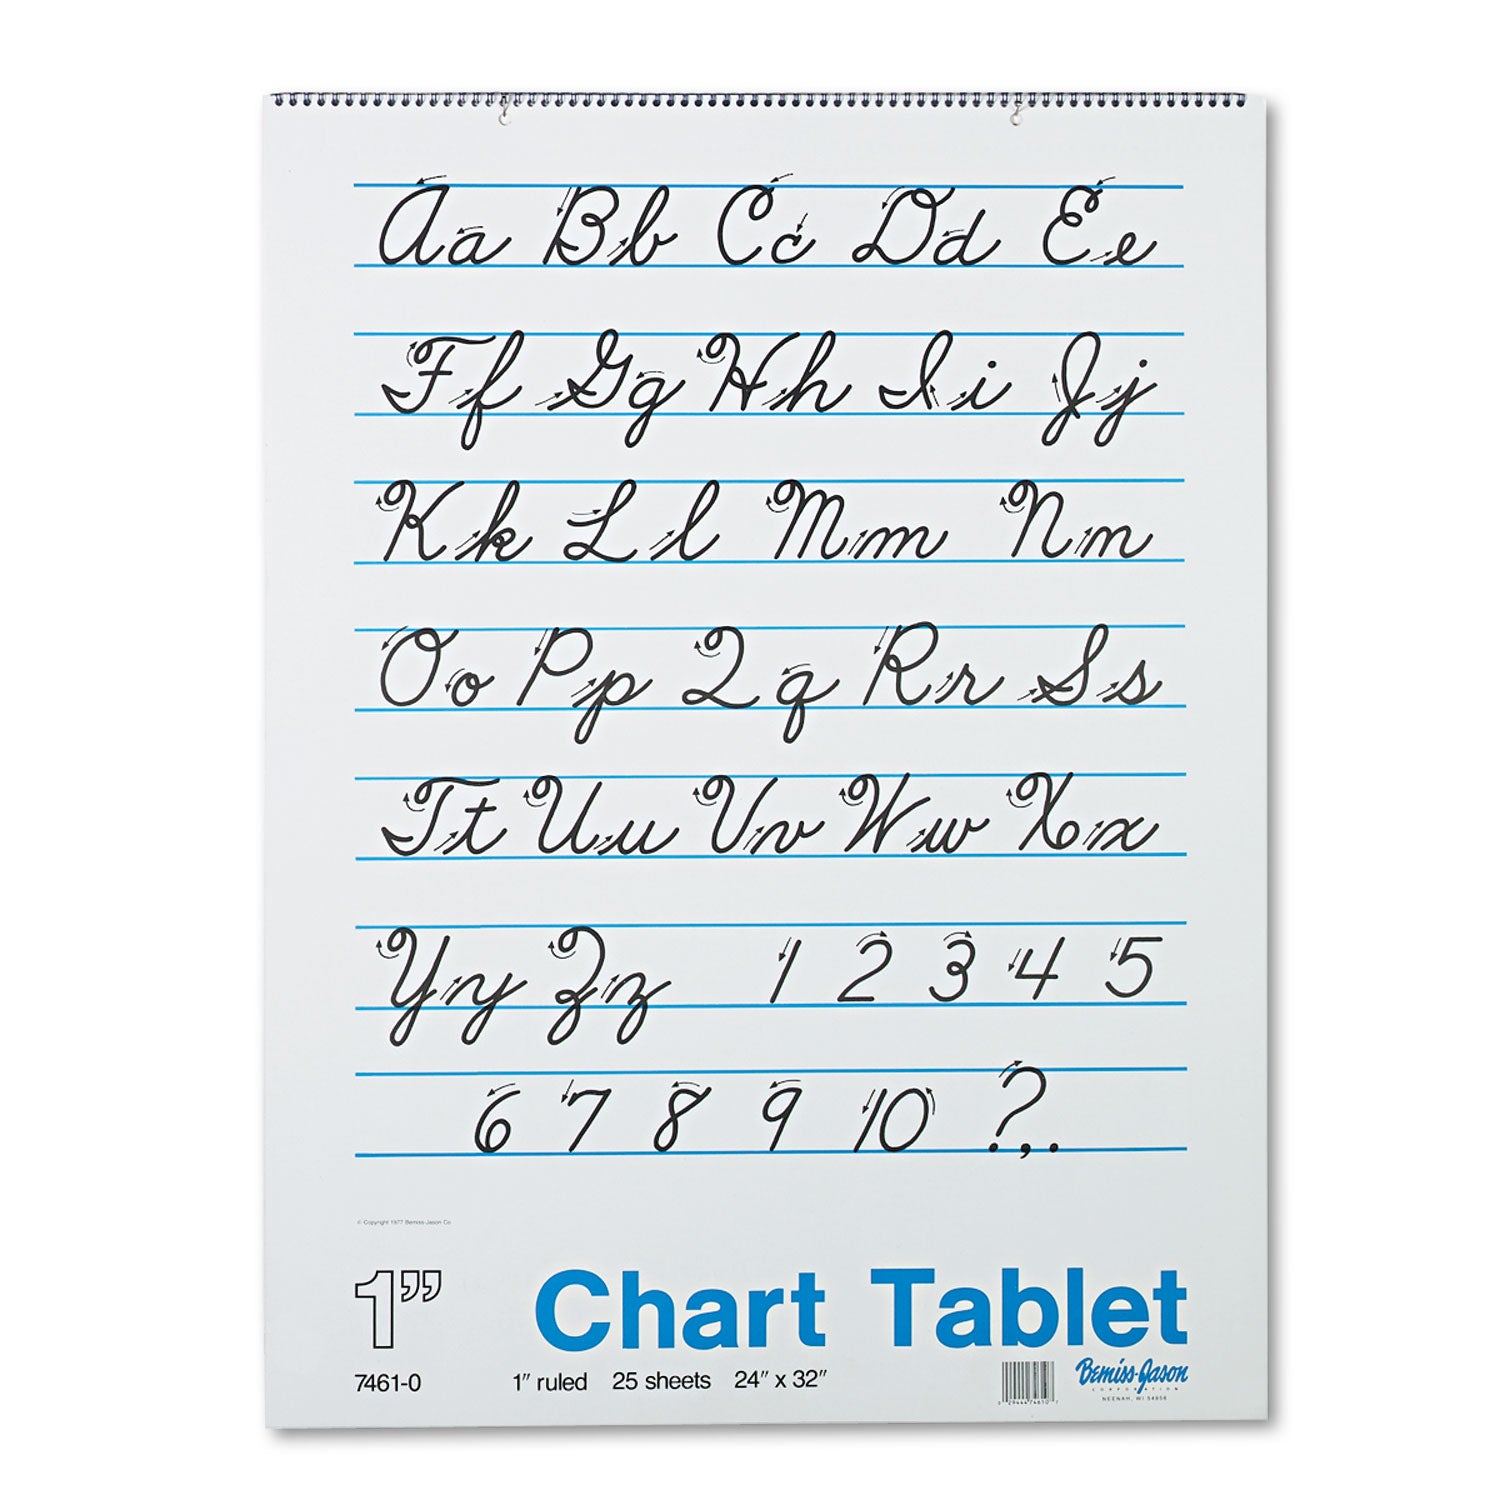 Chart Tablets, Presentation Format (1" Rule), 24 x 32, White, 25 Sheets - 